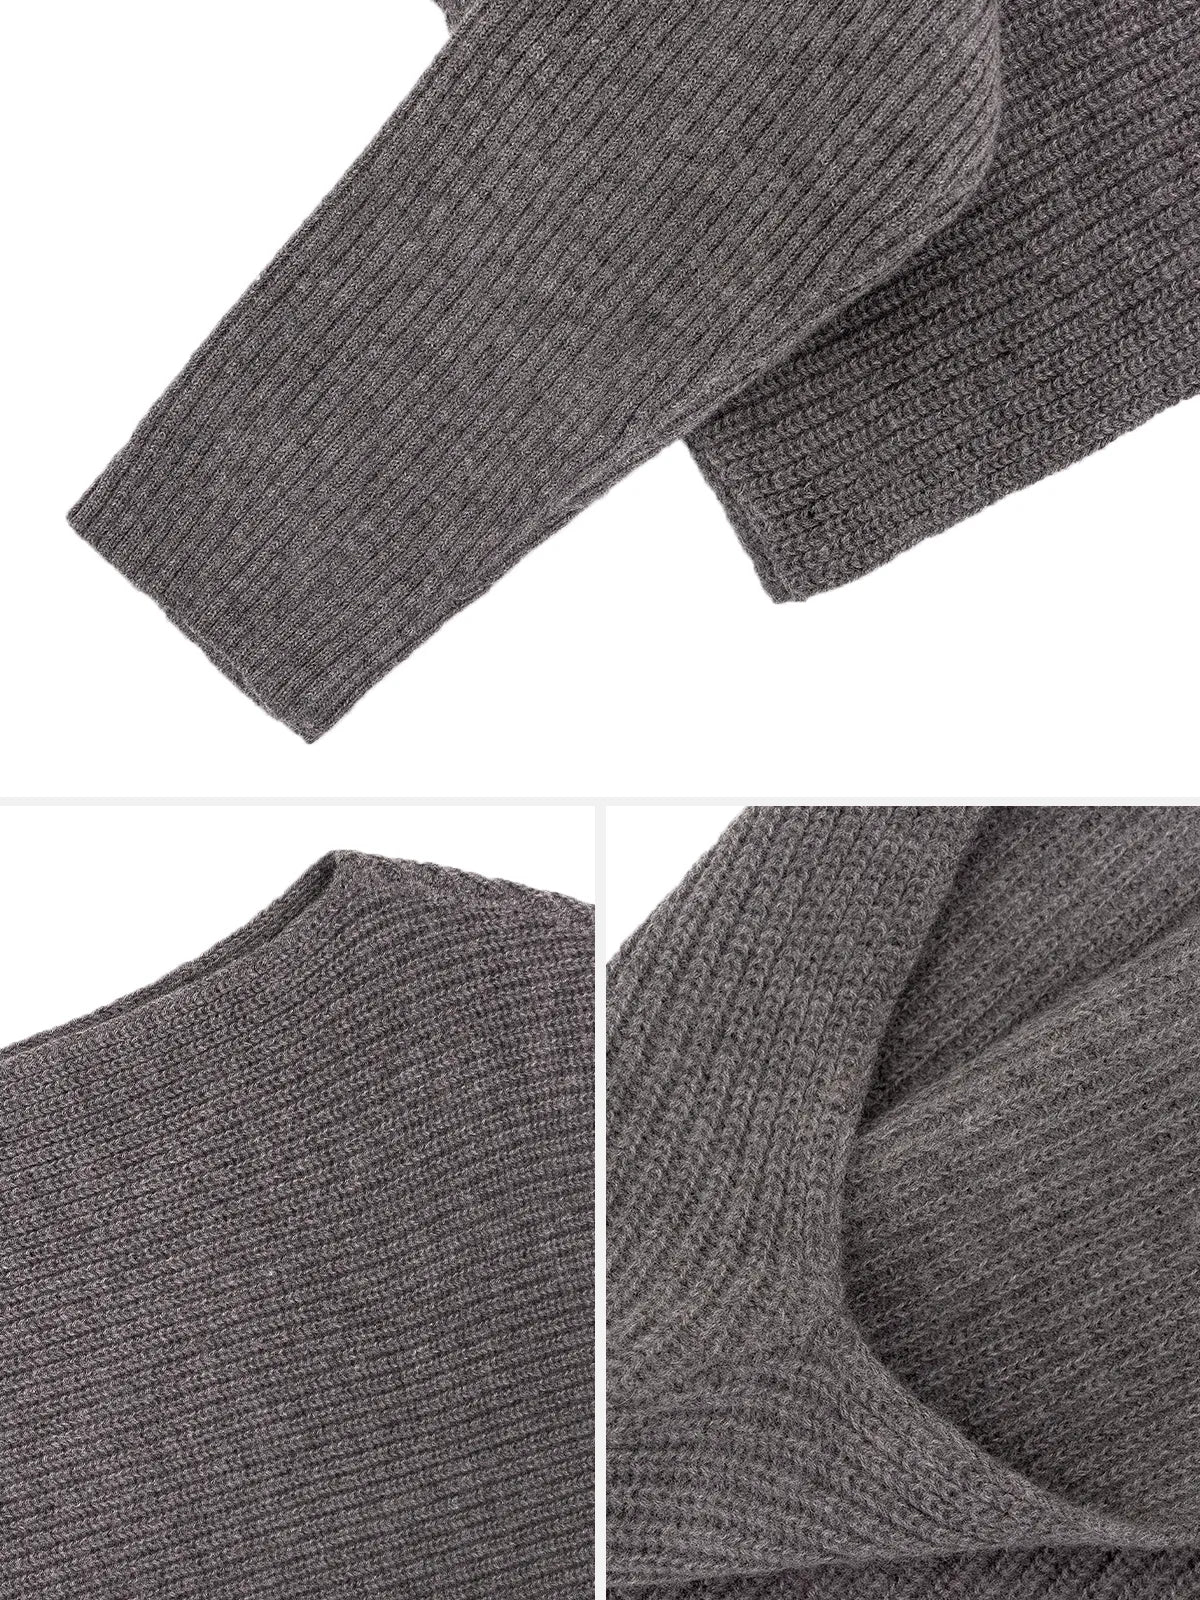 Essential pure wool sweater for a sophisticated and minimalist look